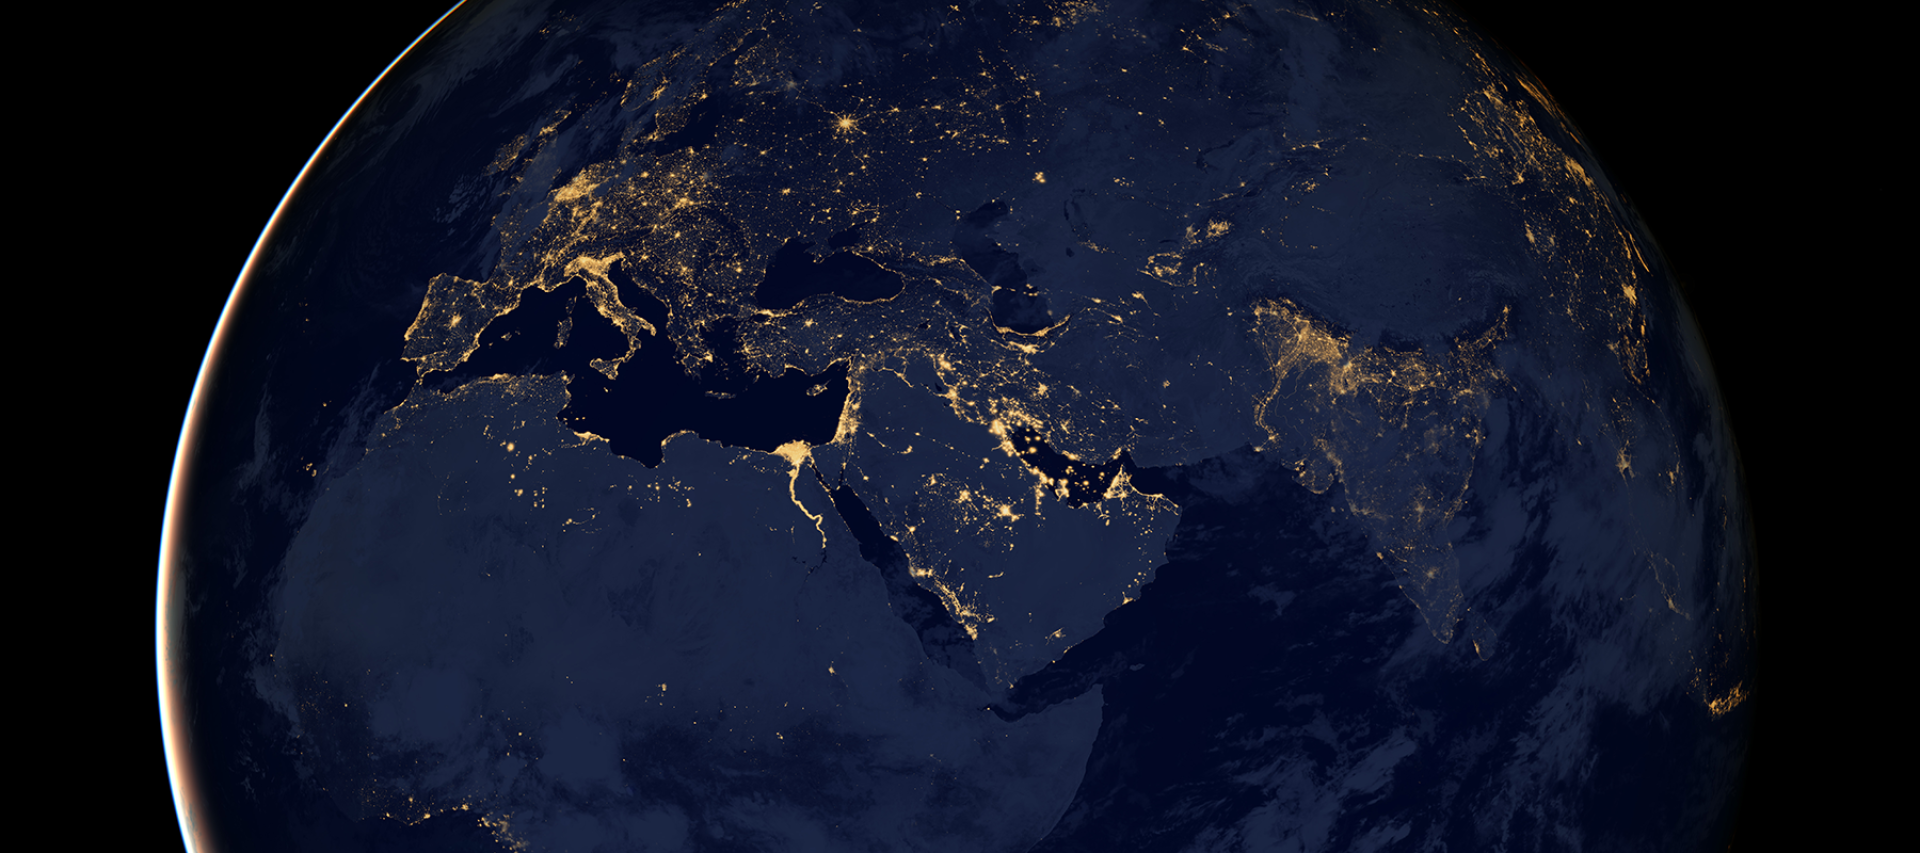 City lights from space over Europe and Africa by NASA